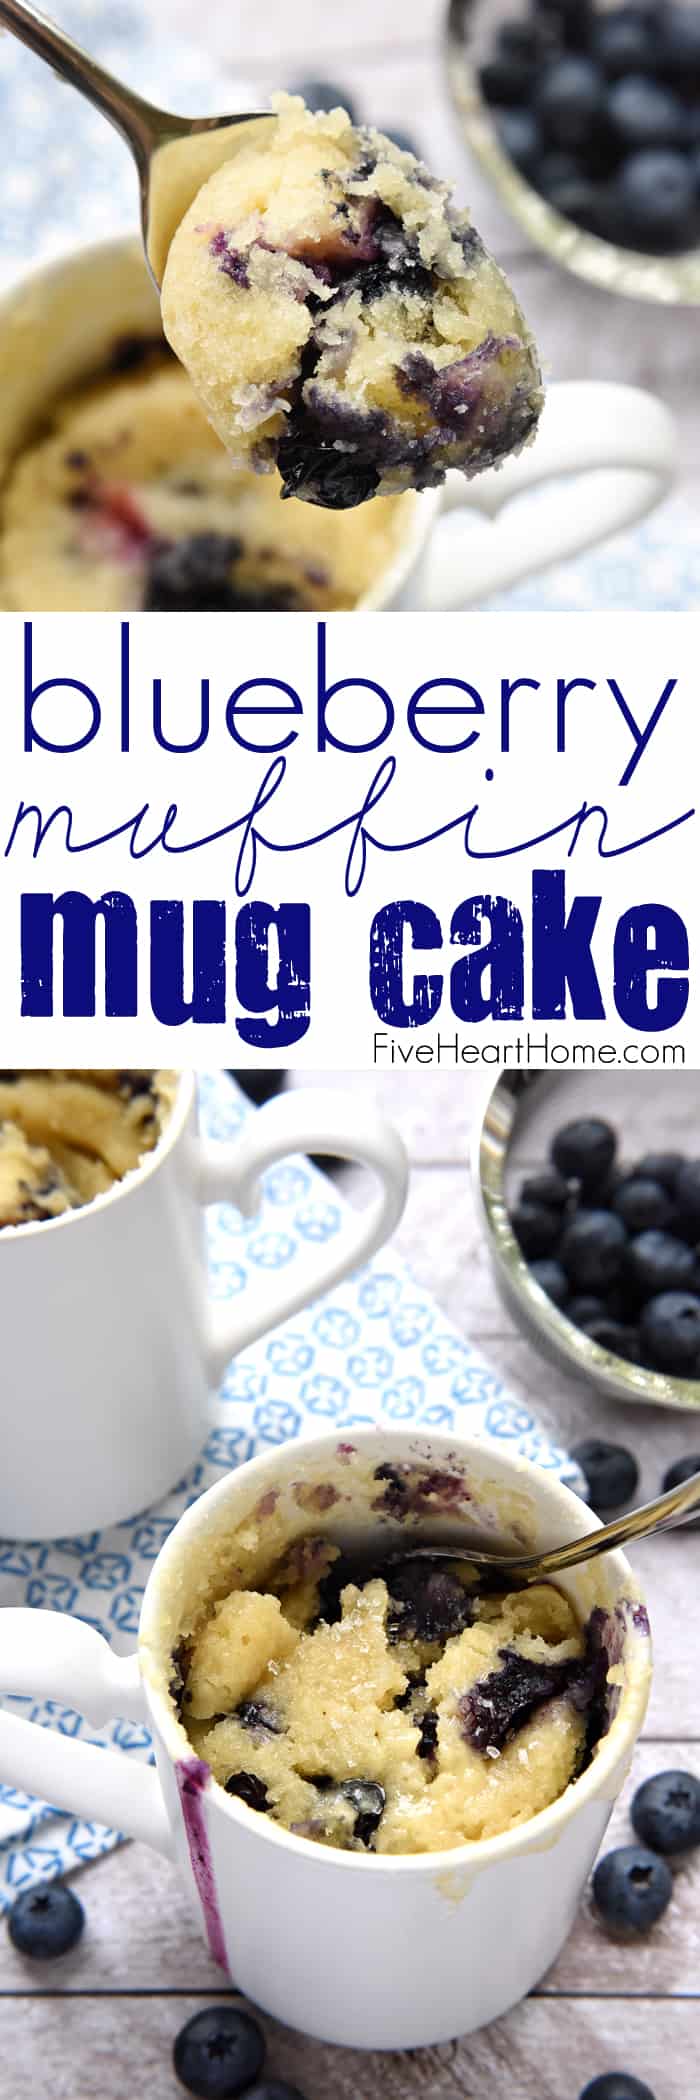 Blueberry Muffin Mug Cake ~ enjoy a fresh, warm, blueberry muffin in a mug that's ready in minutes with this simple-to-make, bursting-with-berries, breakfast or snack recipe | FiveHeartHome.com via @fivehearthome